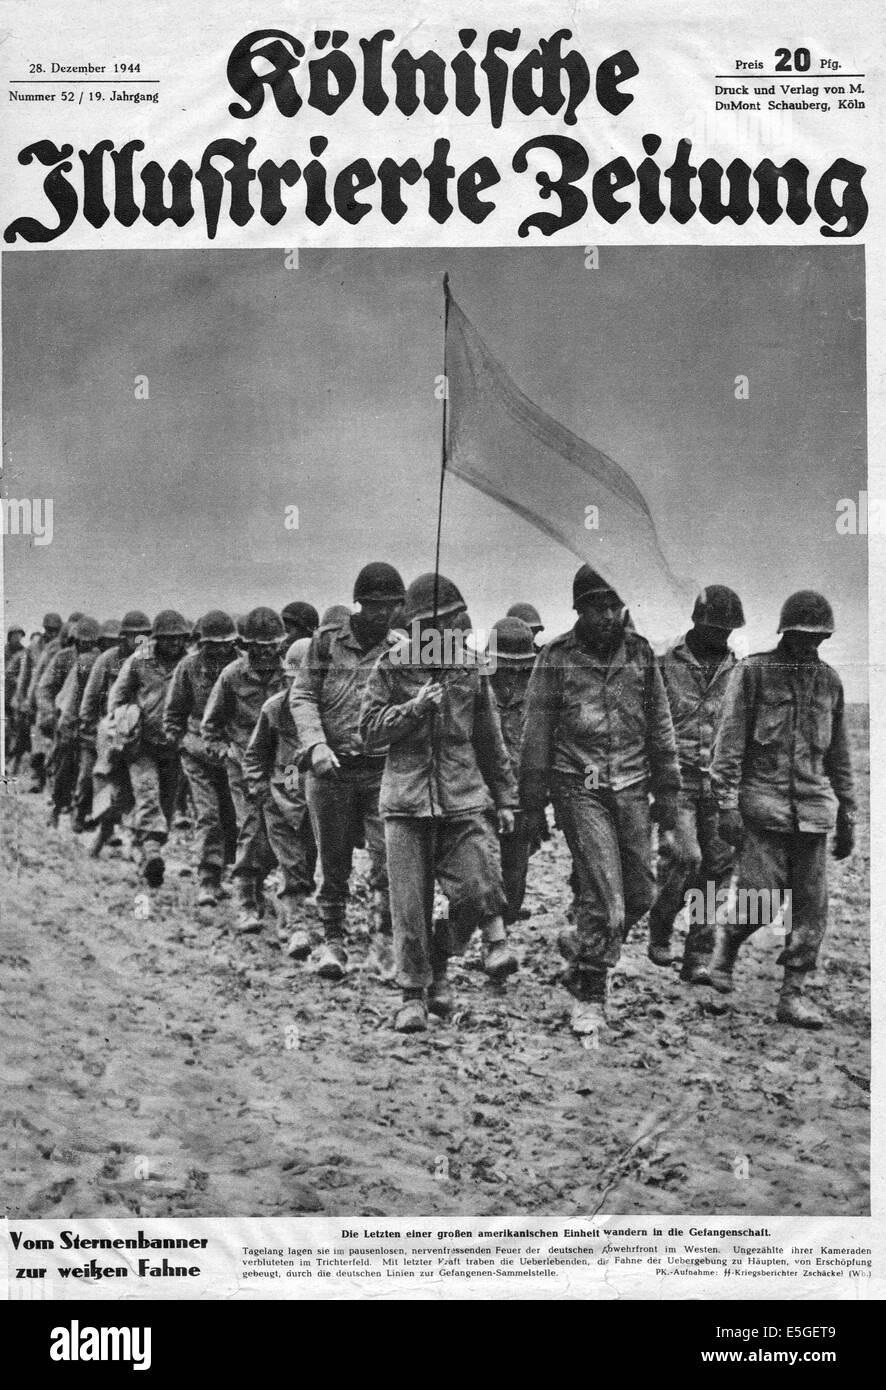 1944 Kolnischer Illustrierte Zeitung front page showing American prisoners of war during the Battle of the Bulge Stock Photo